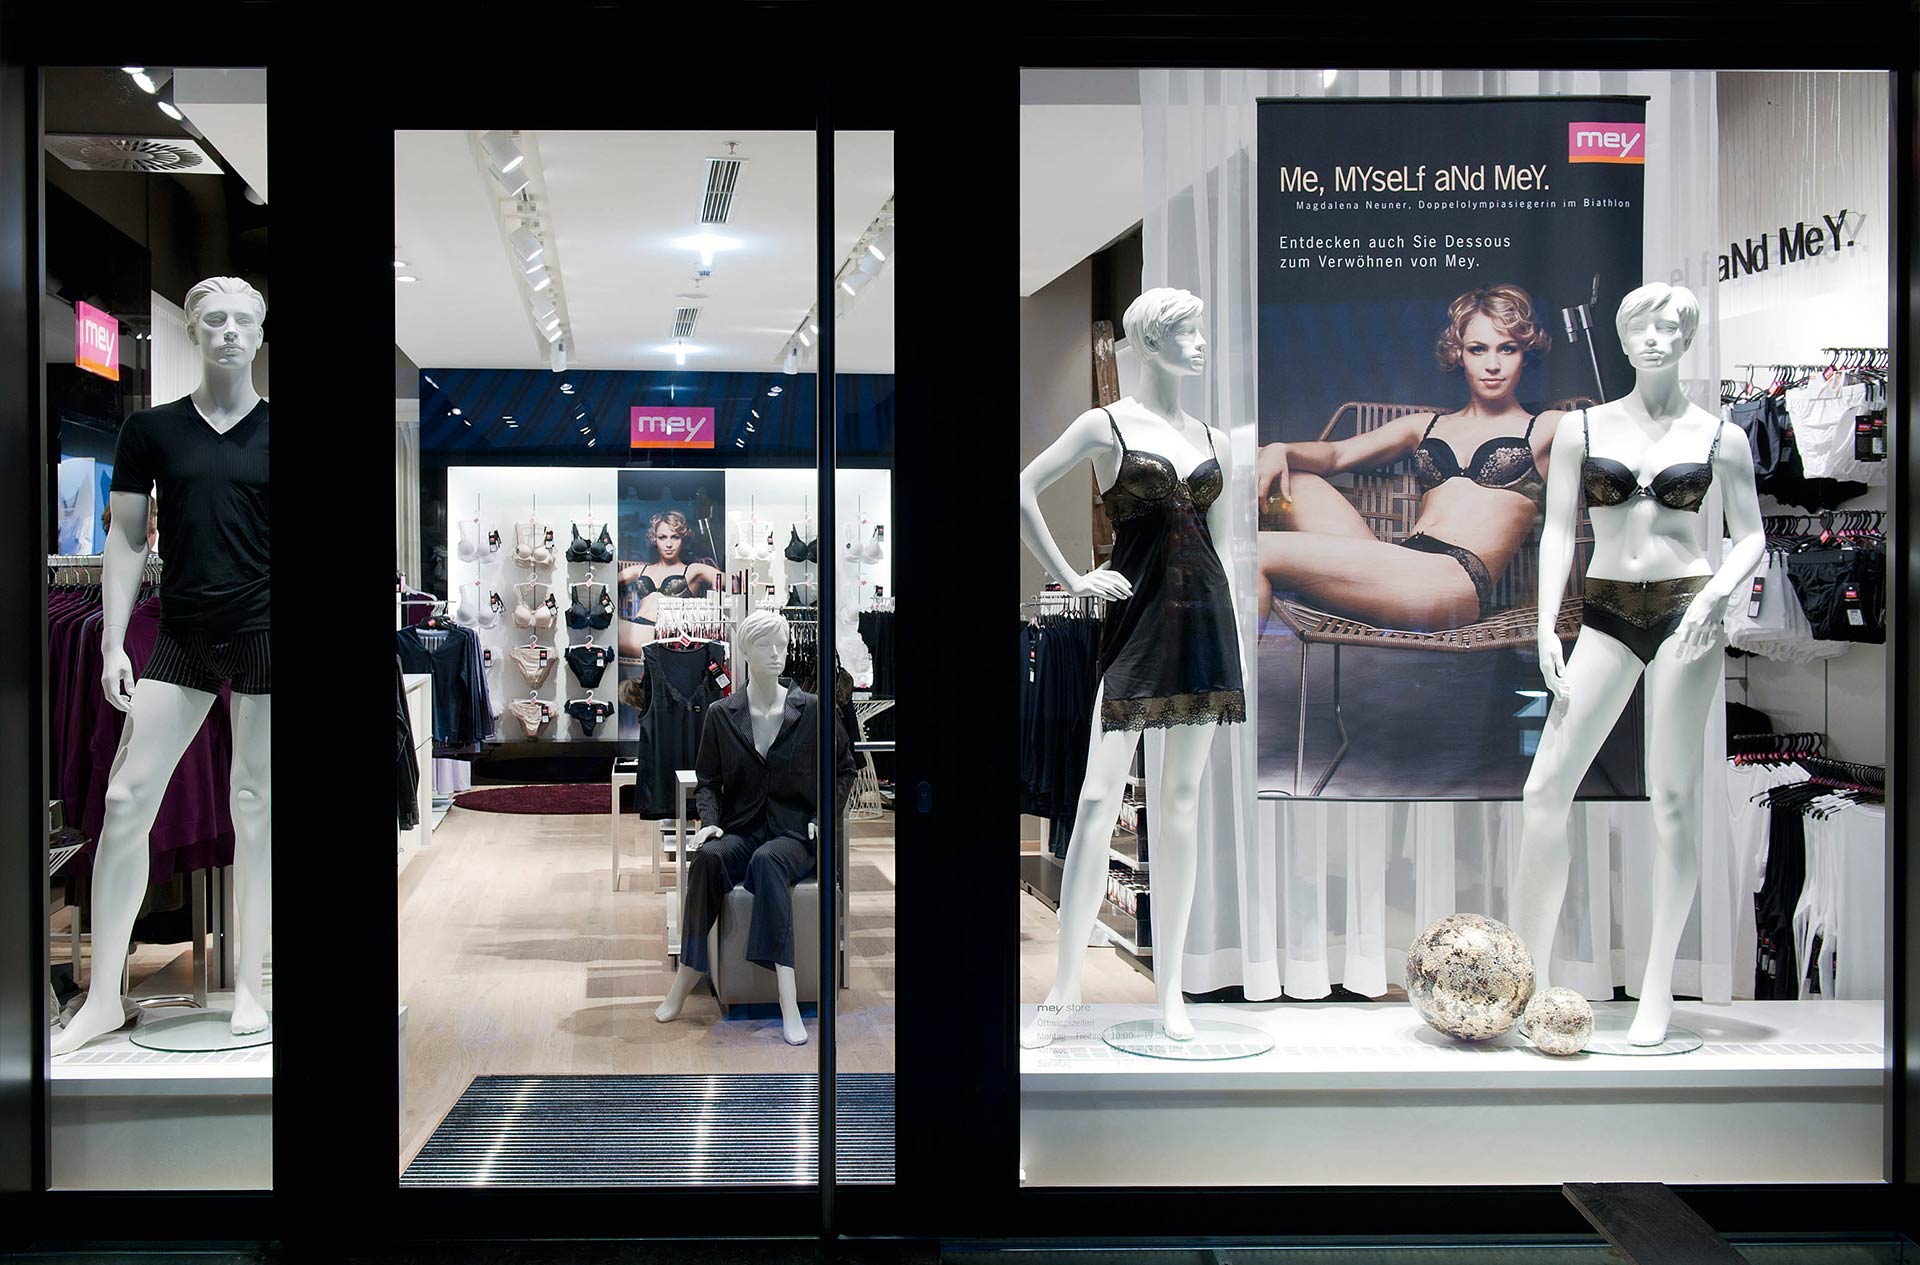 store in Wiesbaden, photographed from the outside with entrance doors, window mannequins and a mey advertising banner in the foreground | mey®